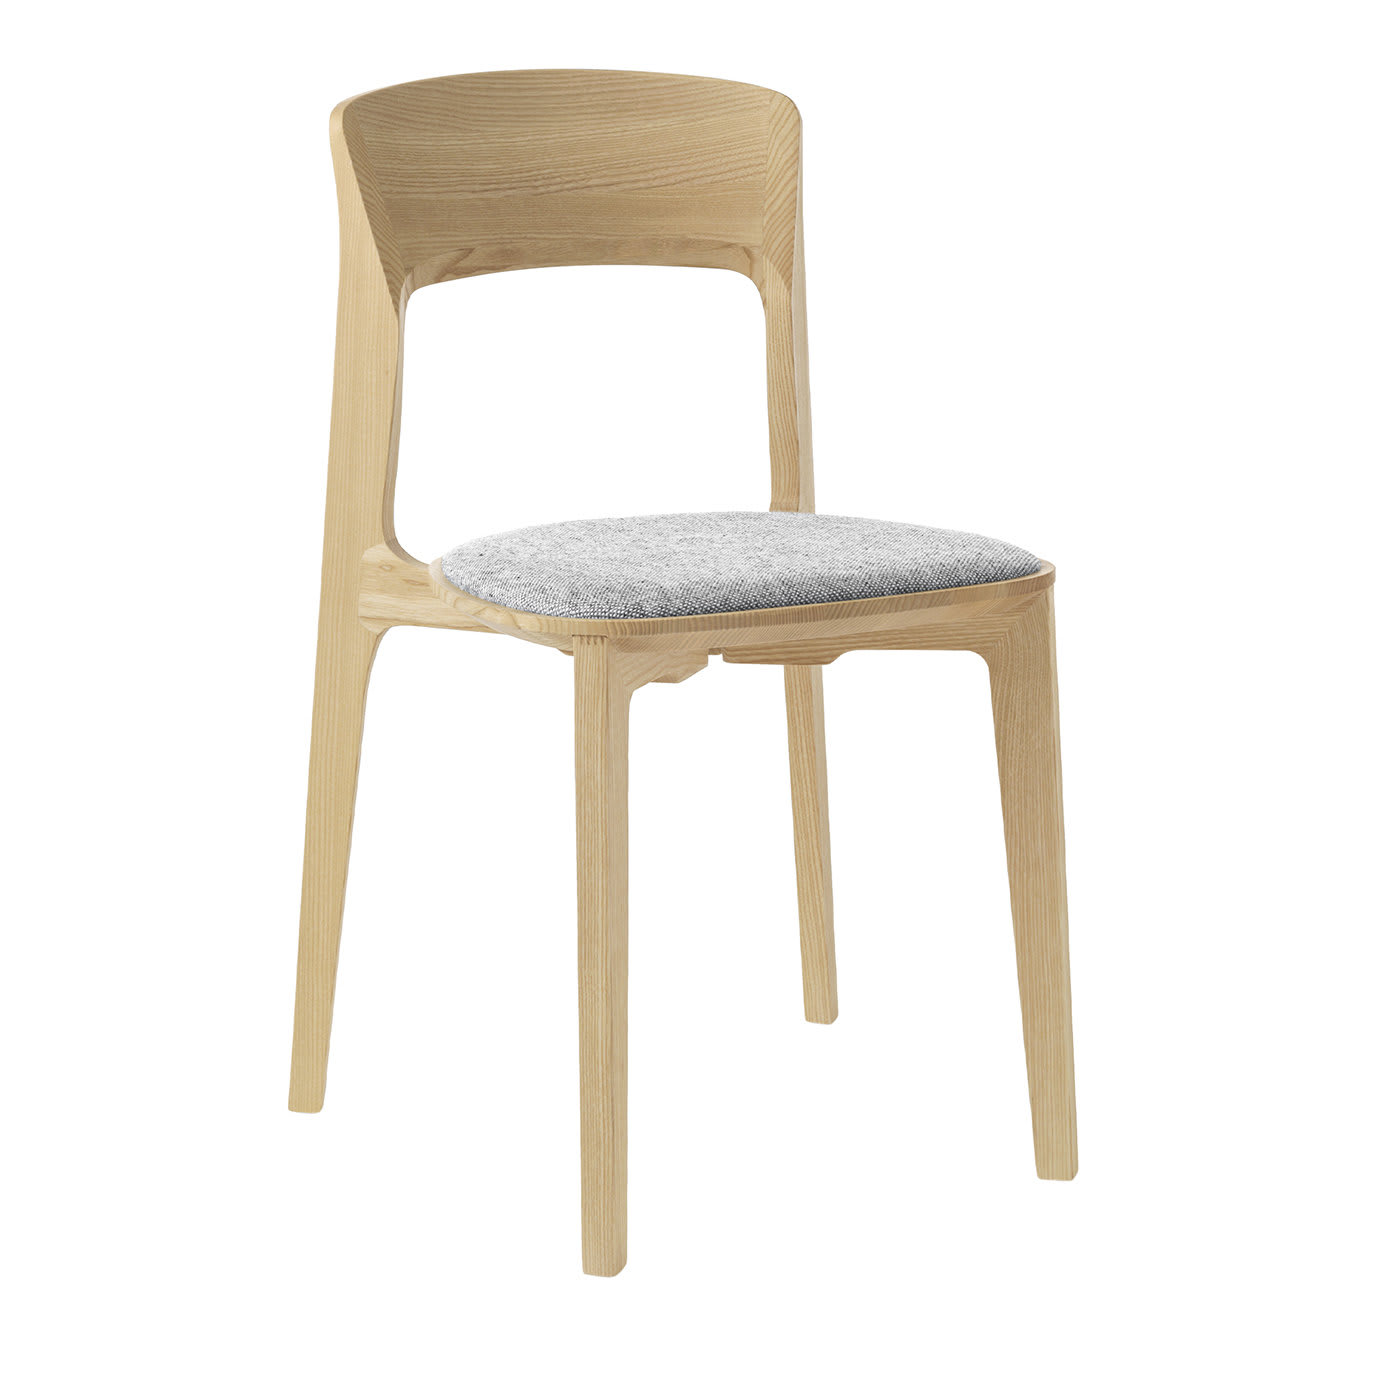 Cetonia Natural Ash Chair with Gray Upholstered Seat - Passoni Design